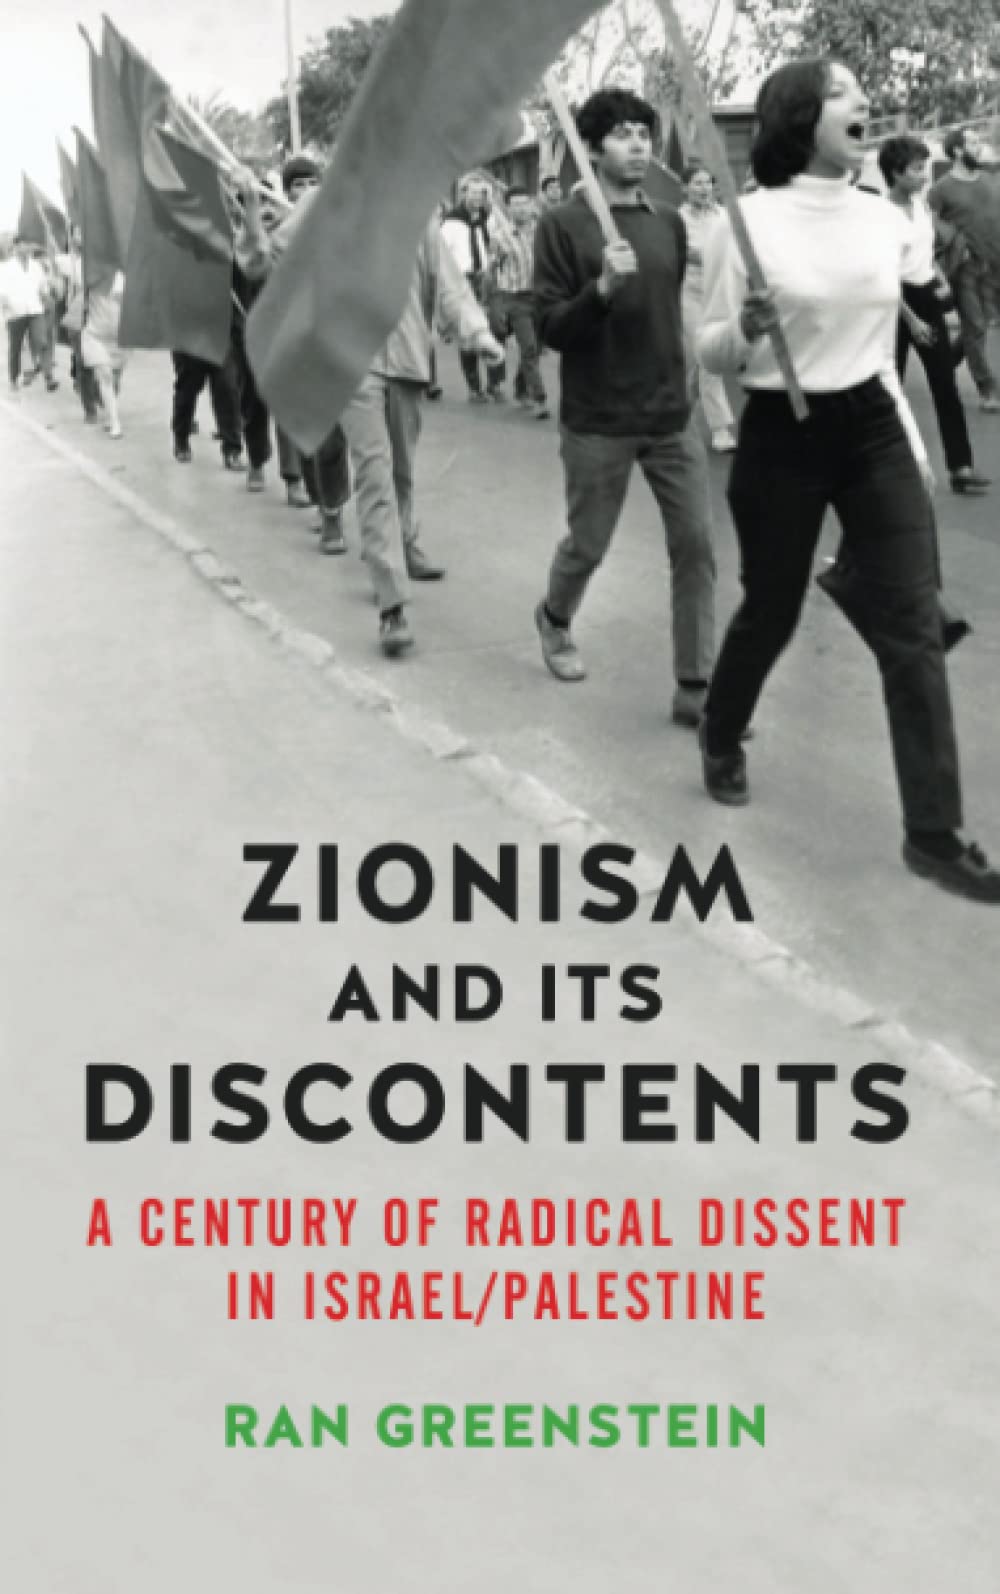 Zionism And Its Discontents: A Century of Radical Dissent in Israel/Palestine